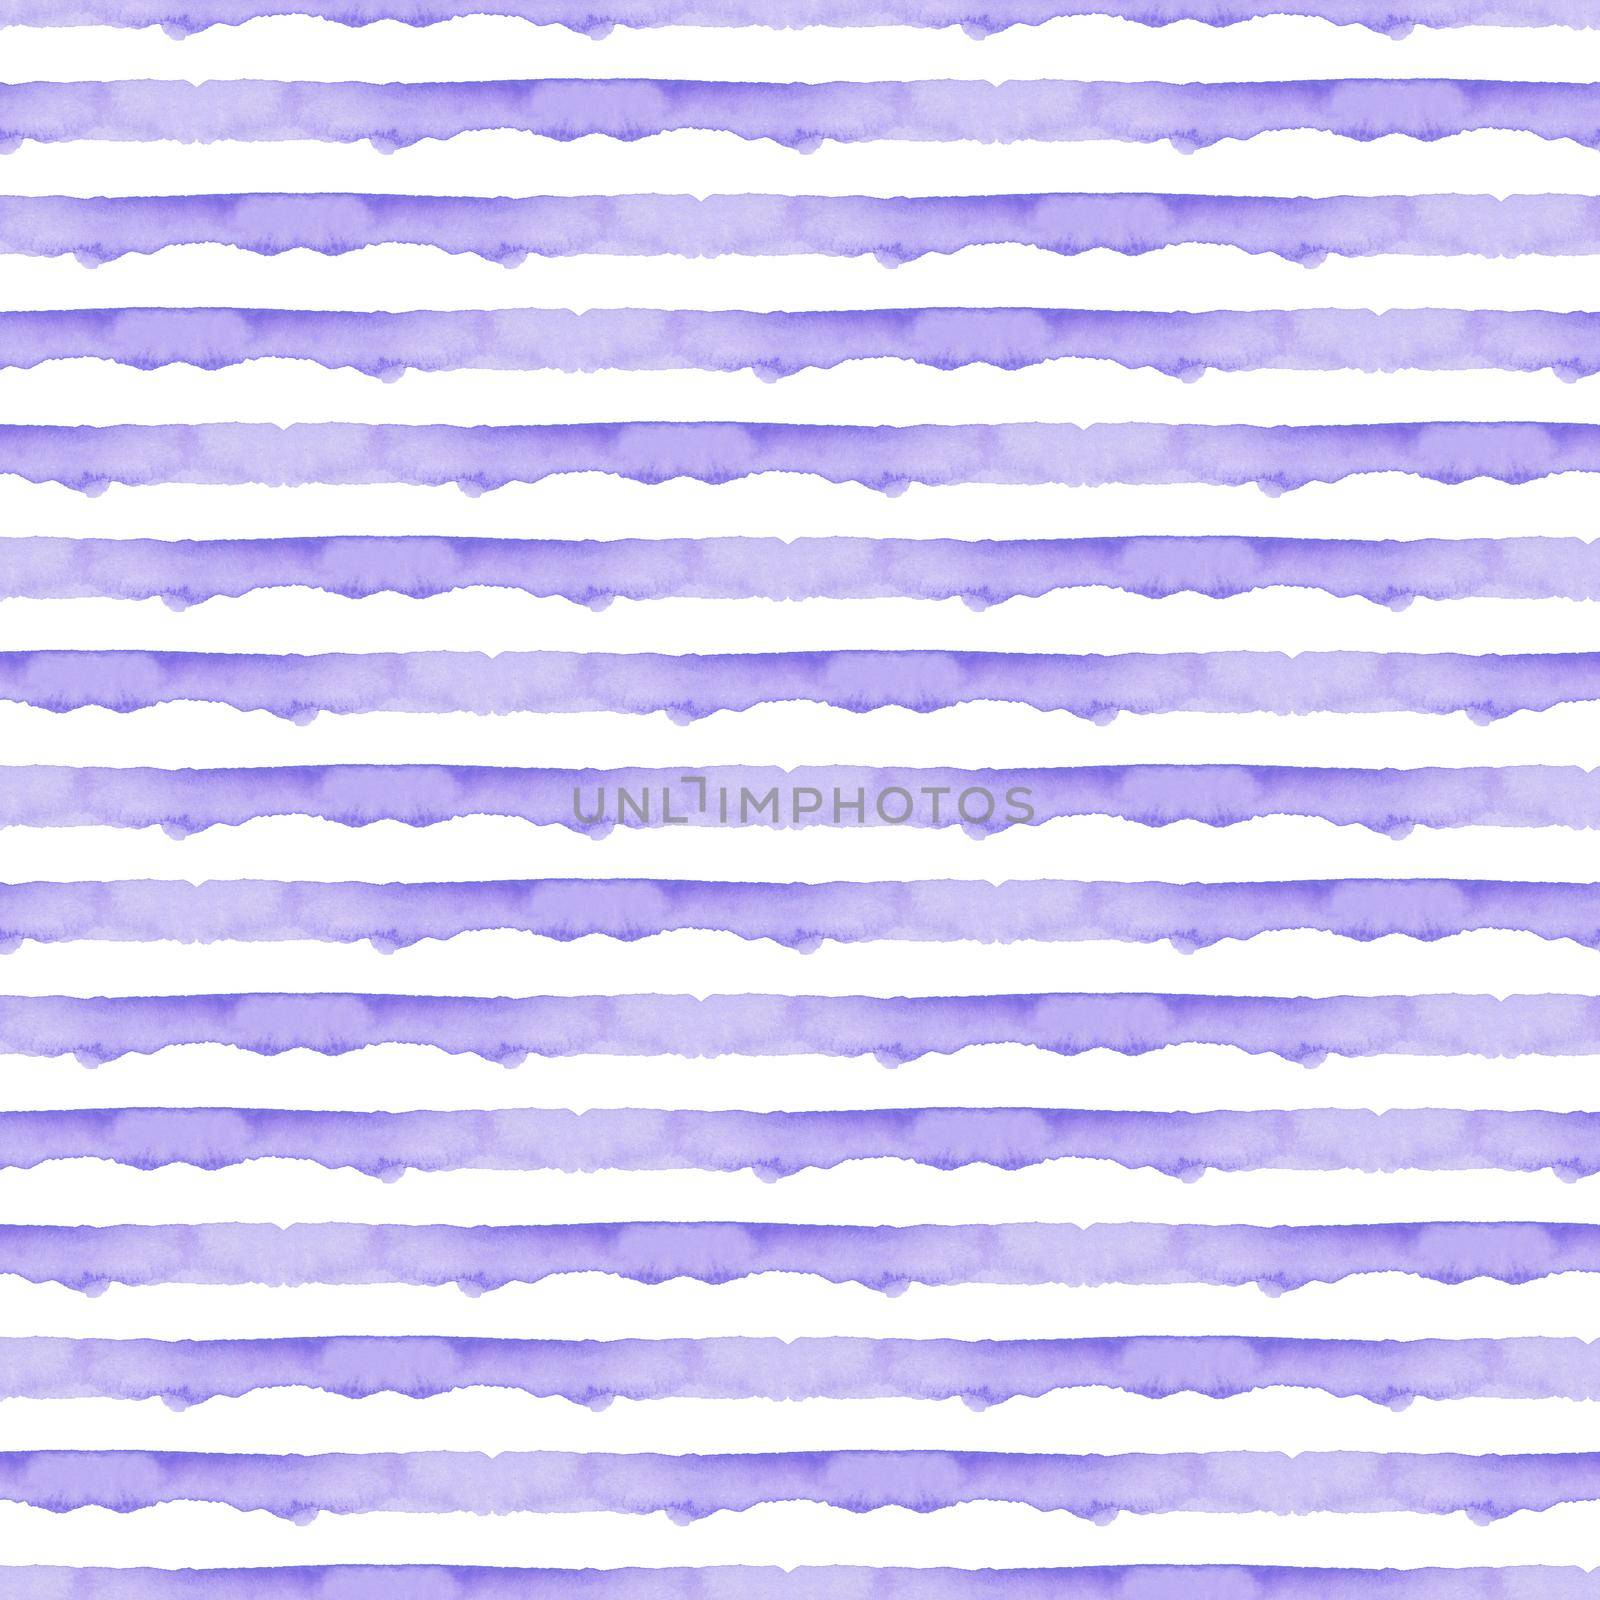 Abstract Blue Stripes Watercolor Background. Ocean Seamless Pattern for Fabric Textile and Paper. Simple Sea Hand Painted Stripe.